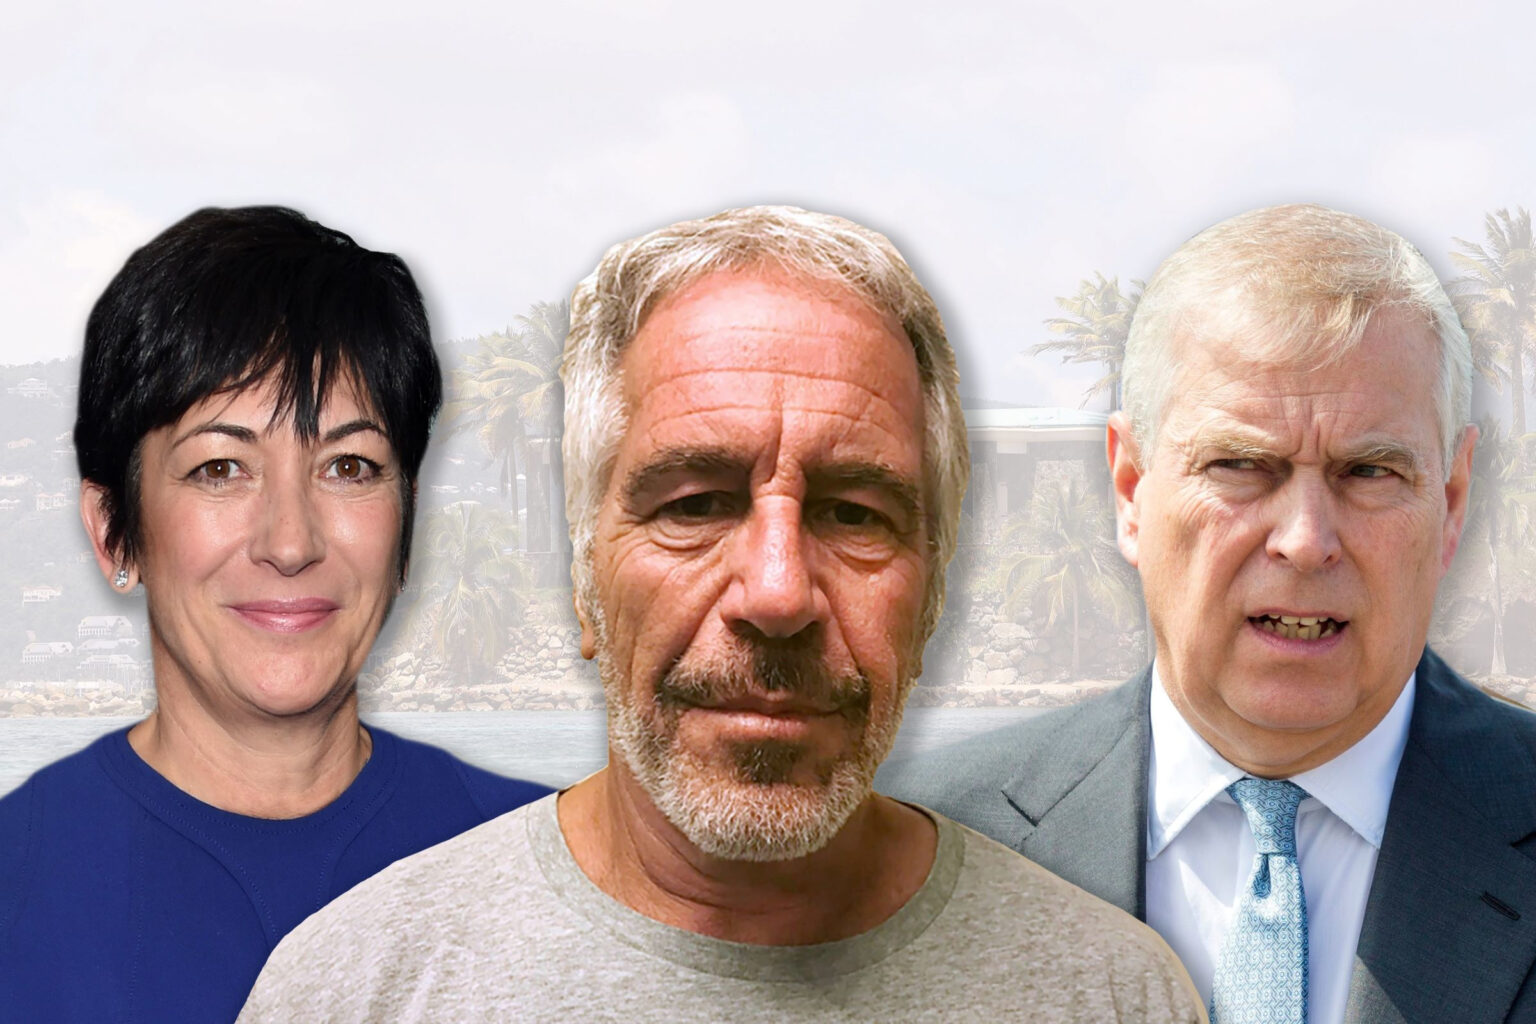 Unsealed documents from Jeffrey Epstein and Ghislaine Maxwell have been revealed. Let’s take a look at friends this could implicate.